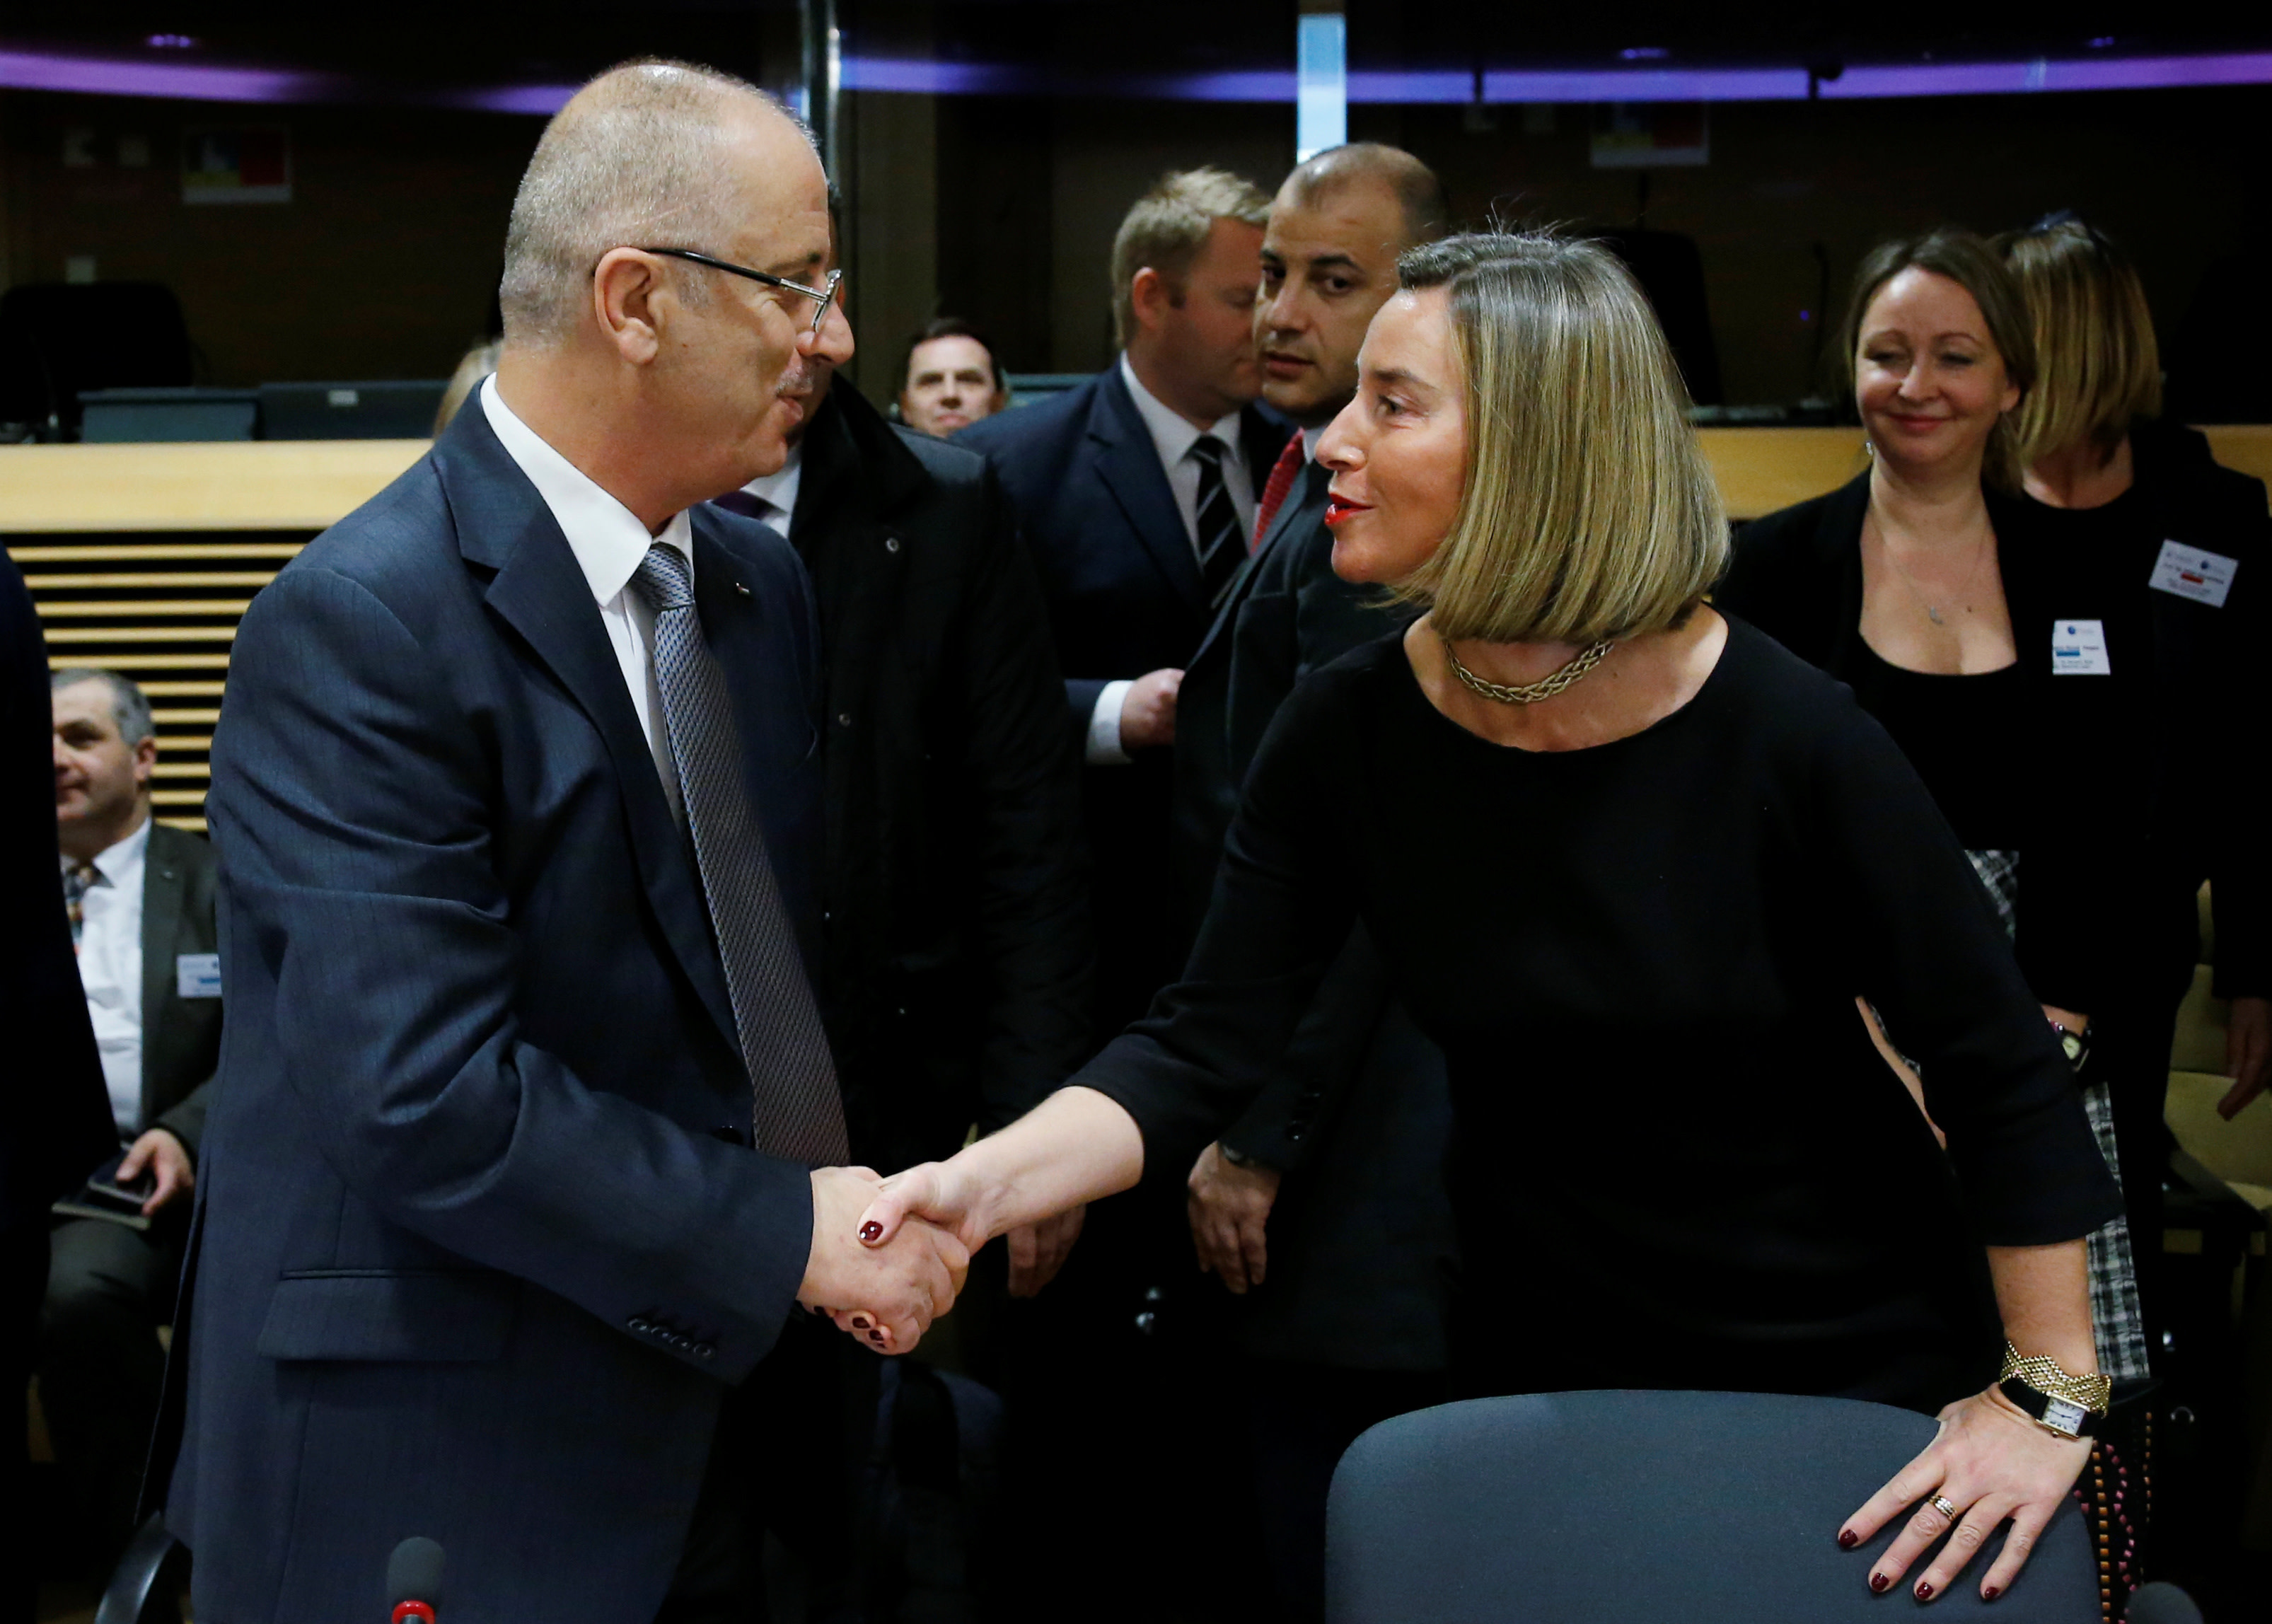 Palestinian Prime Minister Rami Hamdallah shakes hands with European Union's foreign policy chief Federica Mogherini at the EU Commission headquarters in Brussels, Belgium, January 31, 2018. (Reuters)